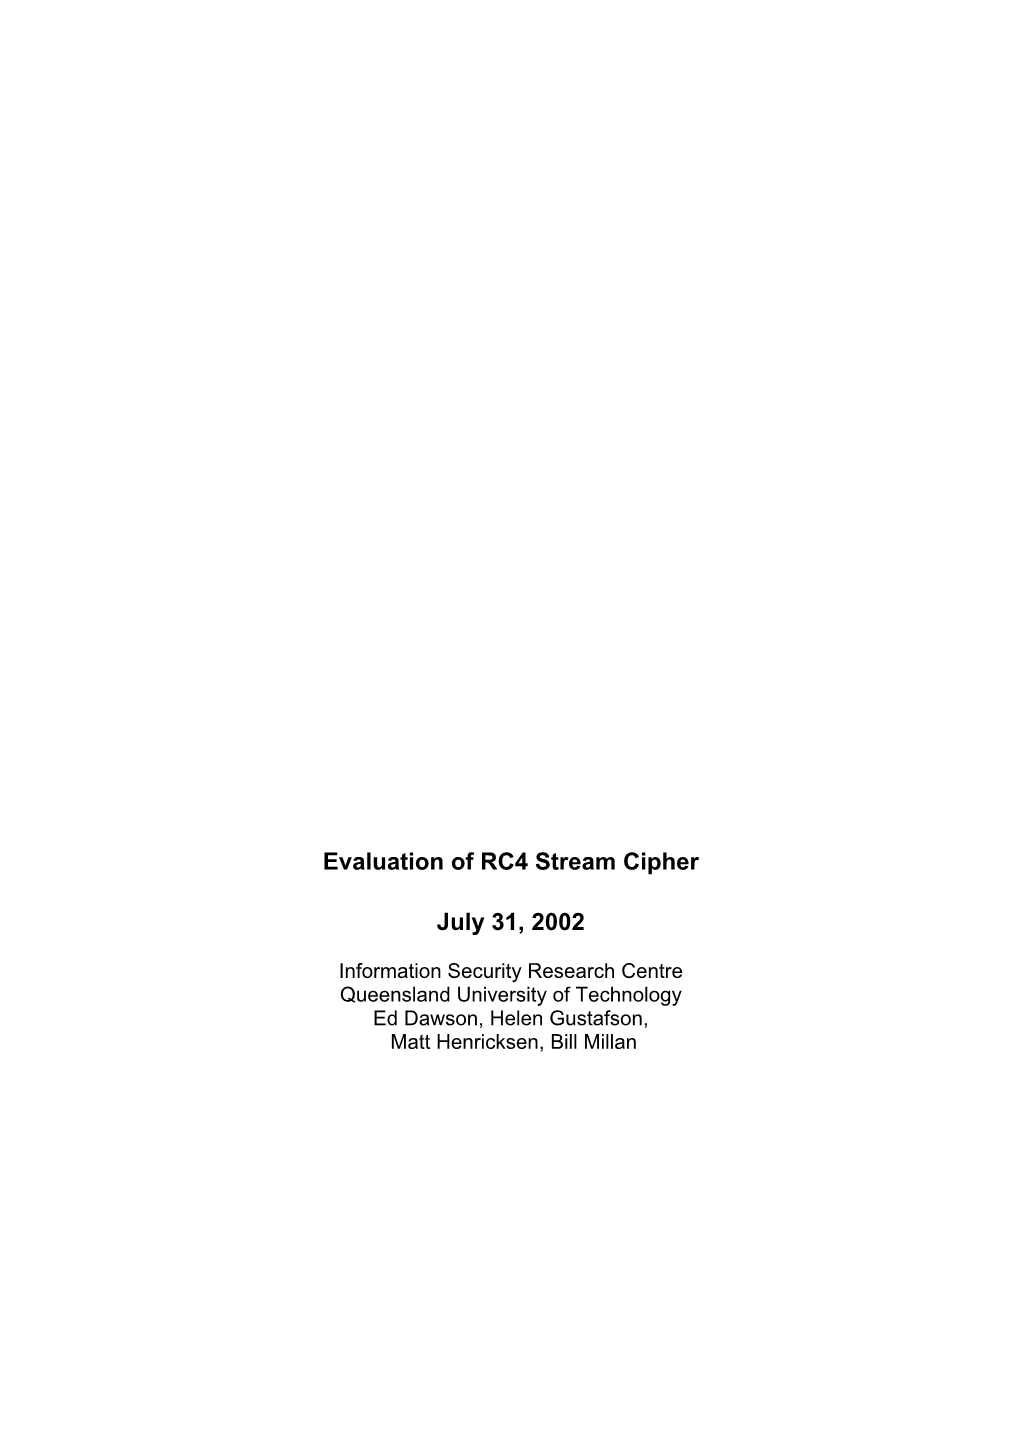 A Report on the Security of the RC4 Stream Cipher